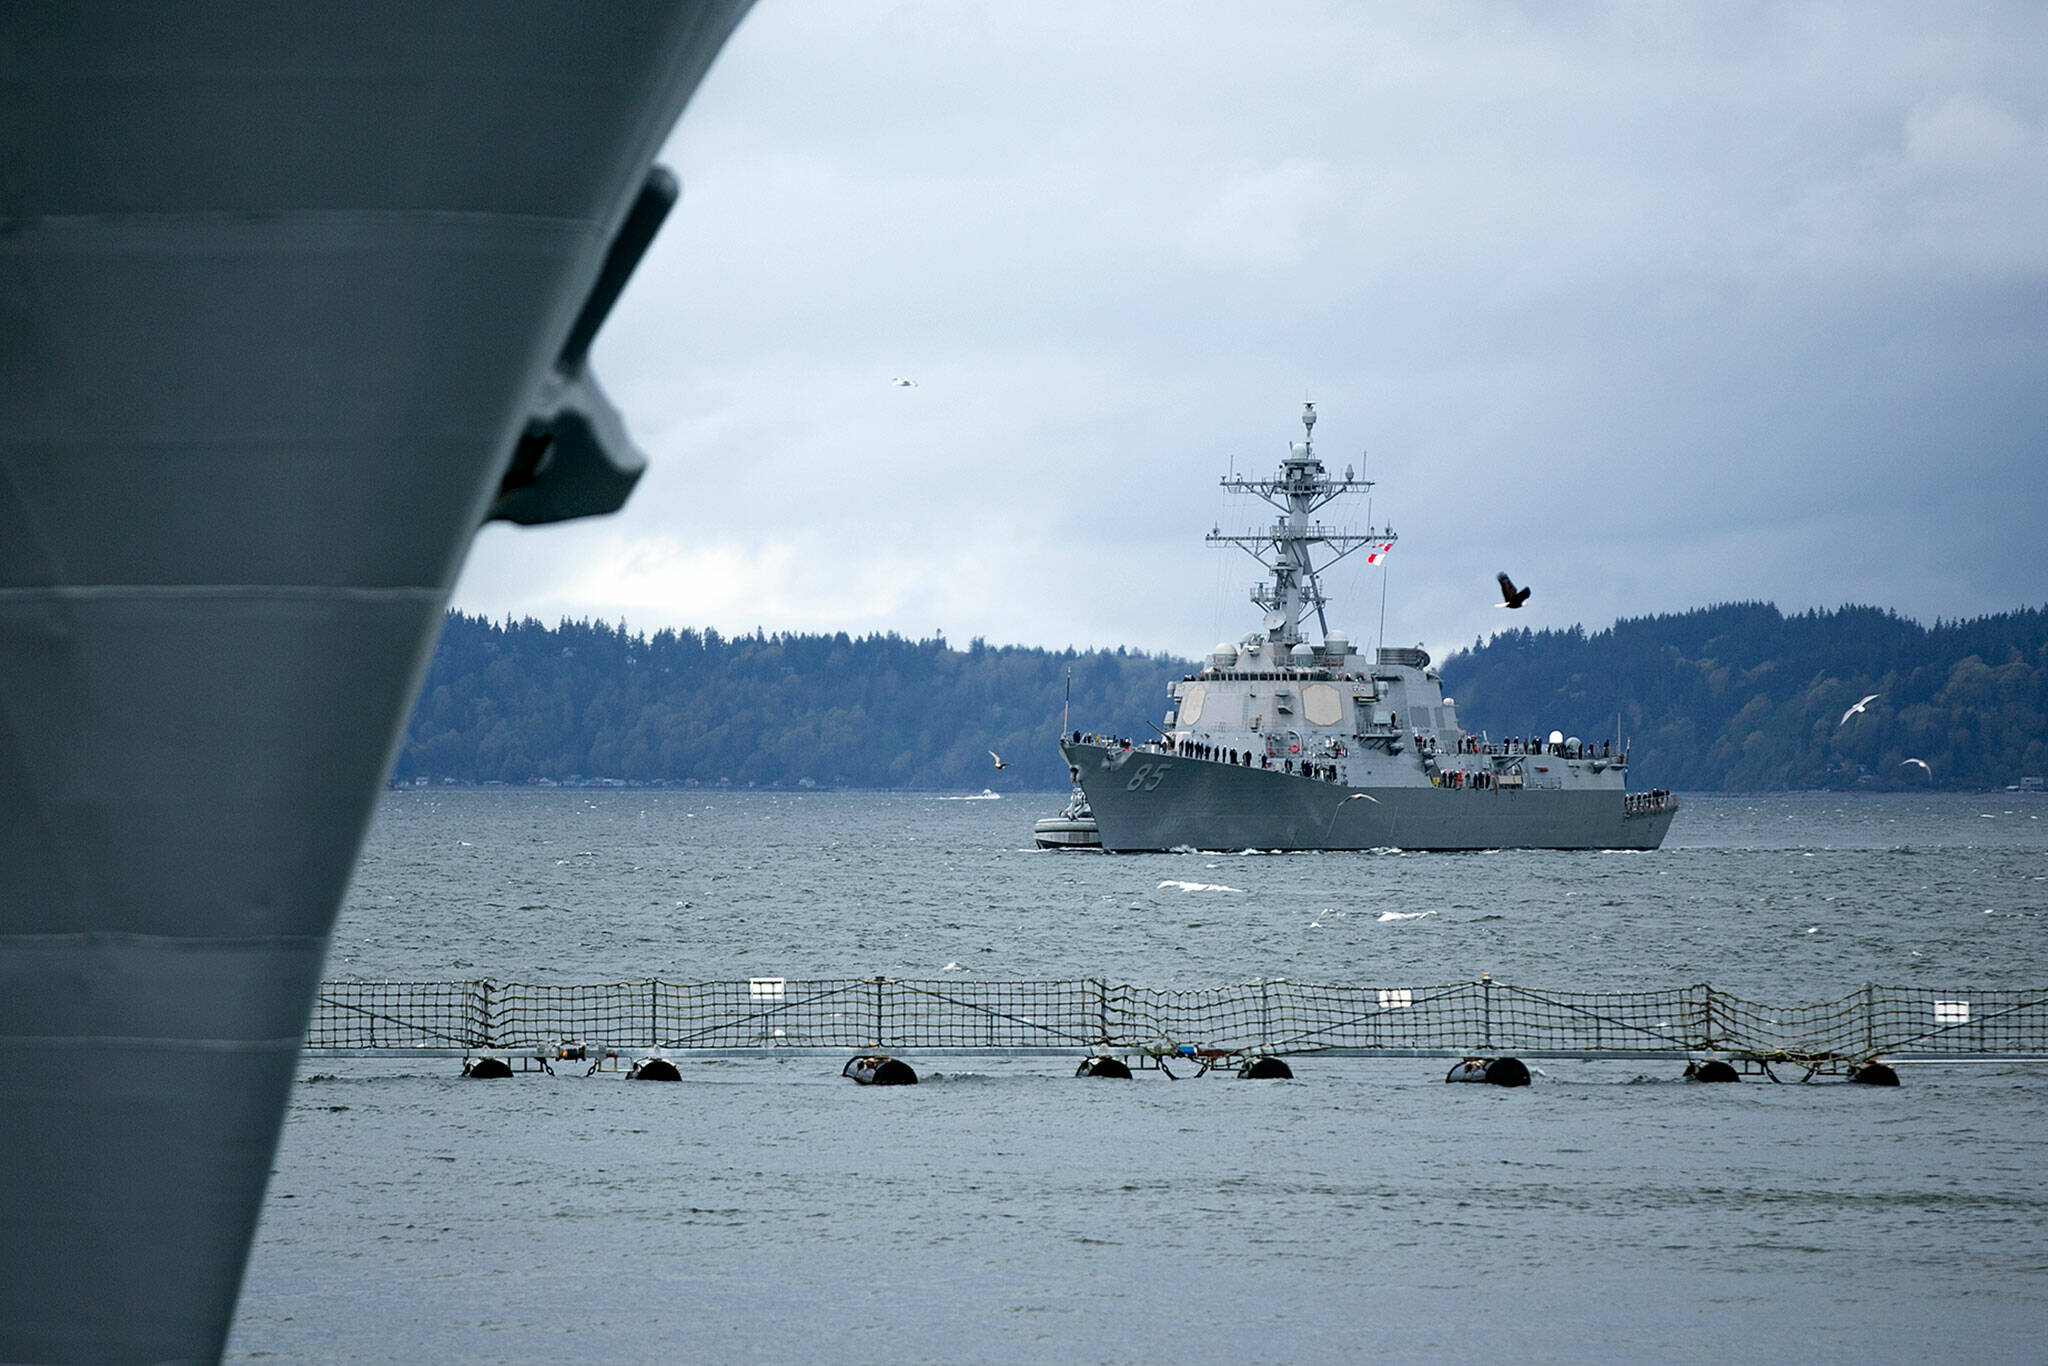 A bald eagle and a flock of seagulls fly past the USS McCampbell as it arrives Friday at Naval Station Everett. (Ryan Berry / The Herald)